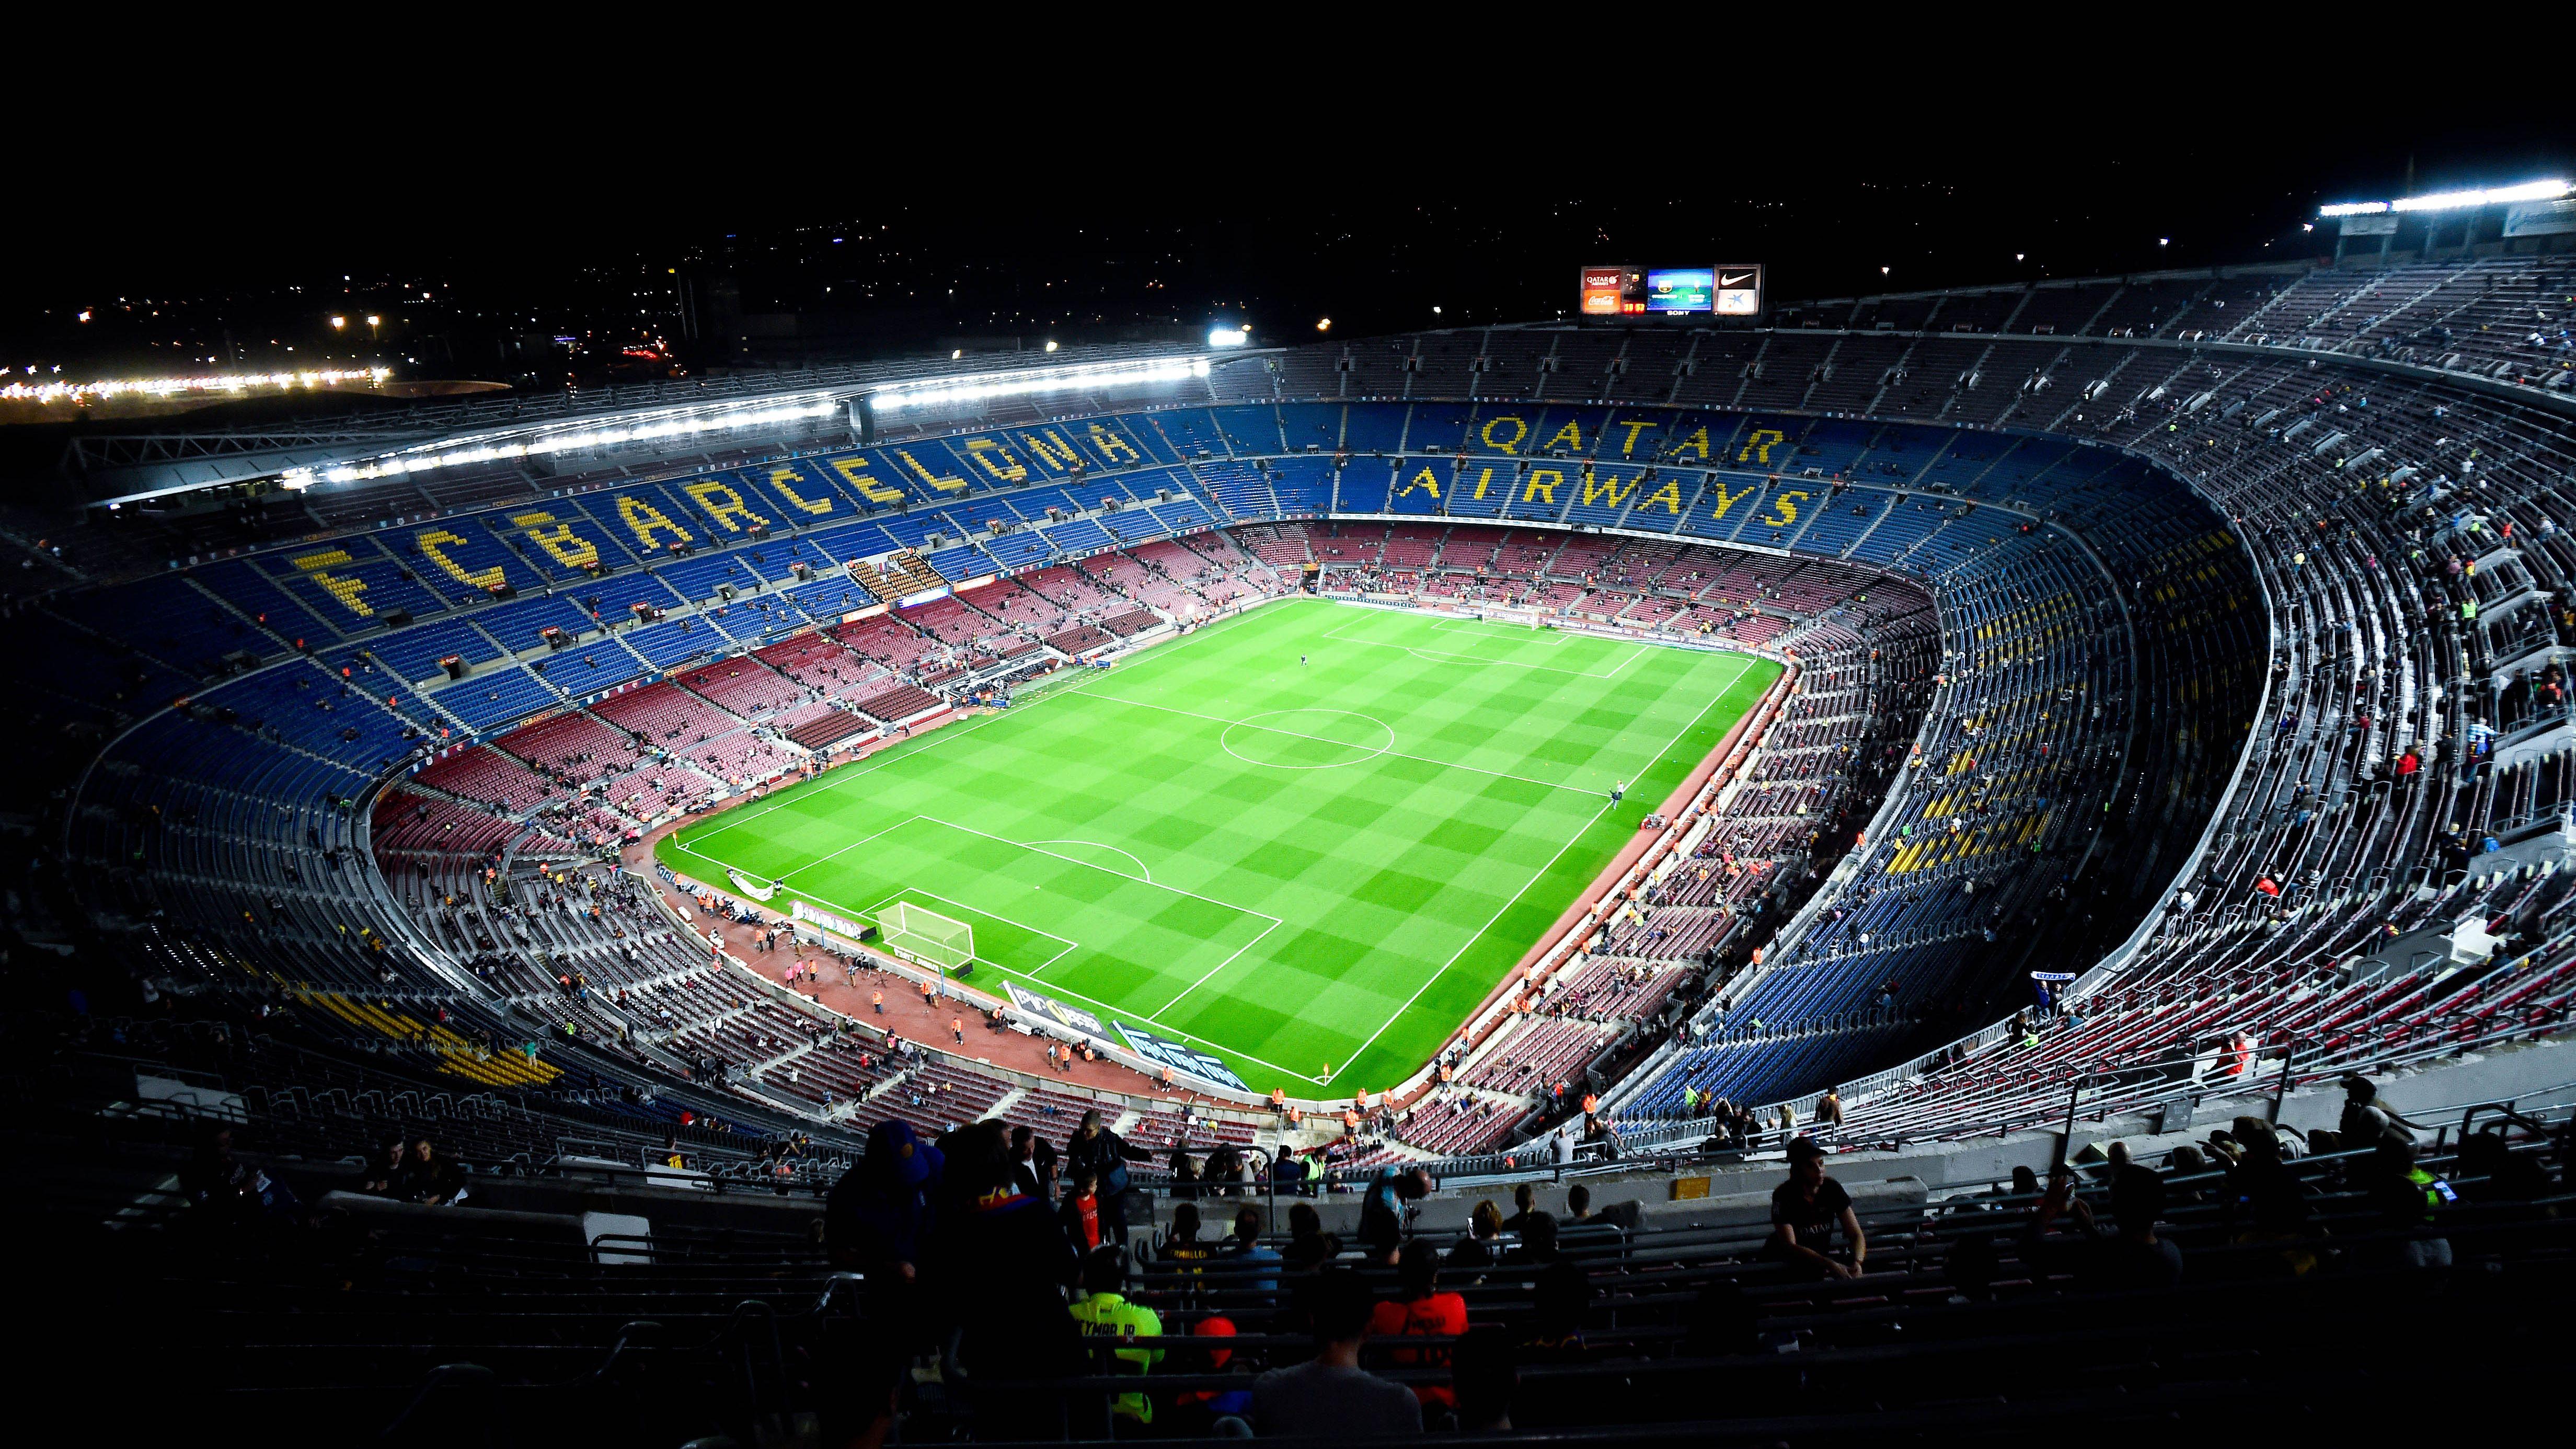 Camp Nou name change: Barcelona could add Qatar Airways to name